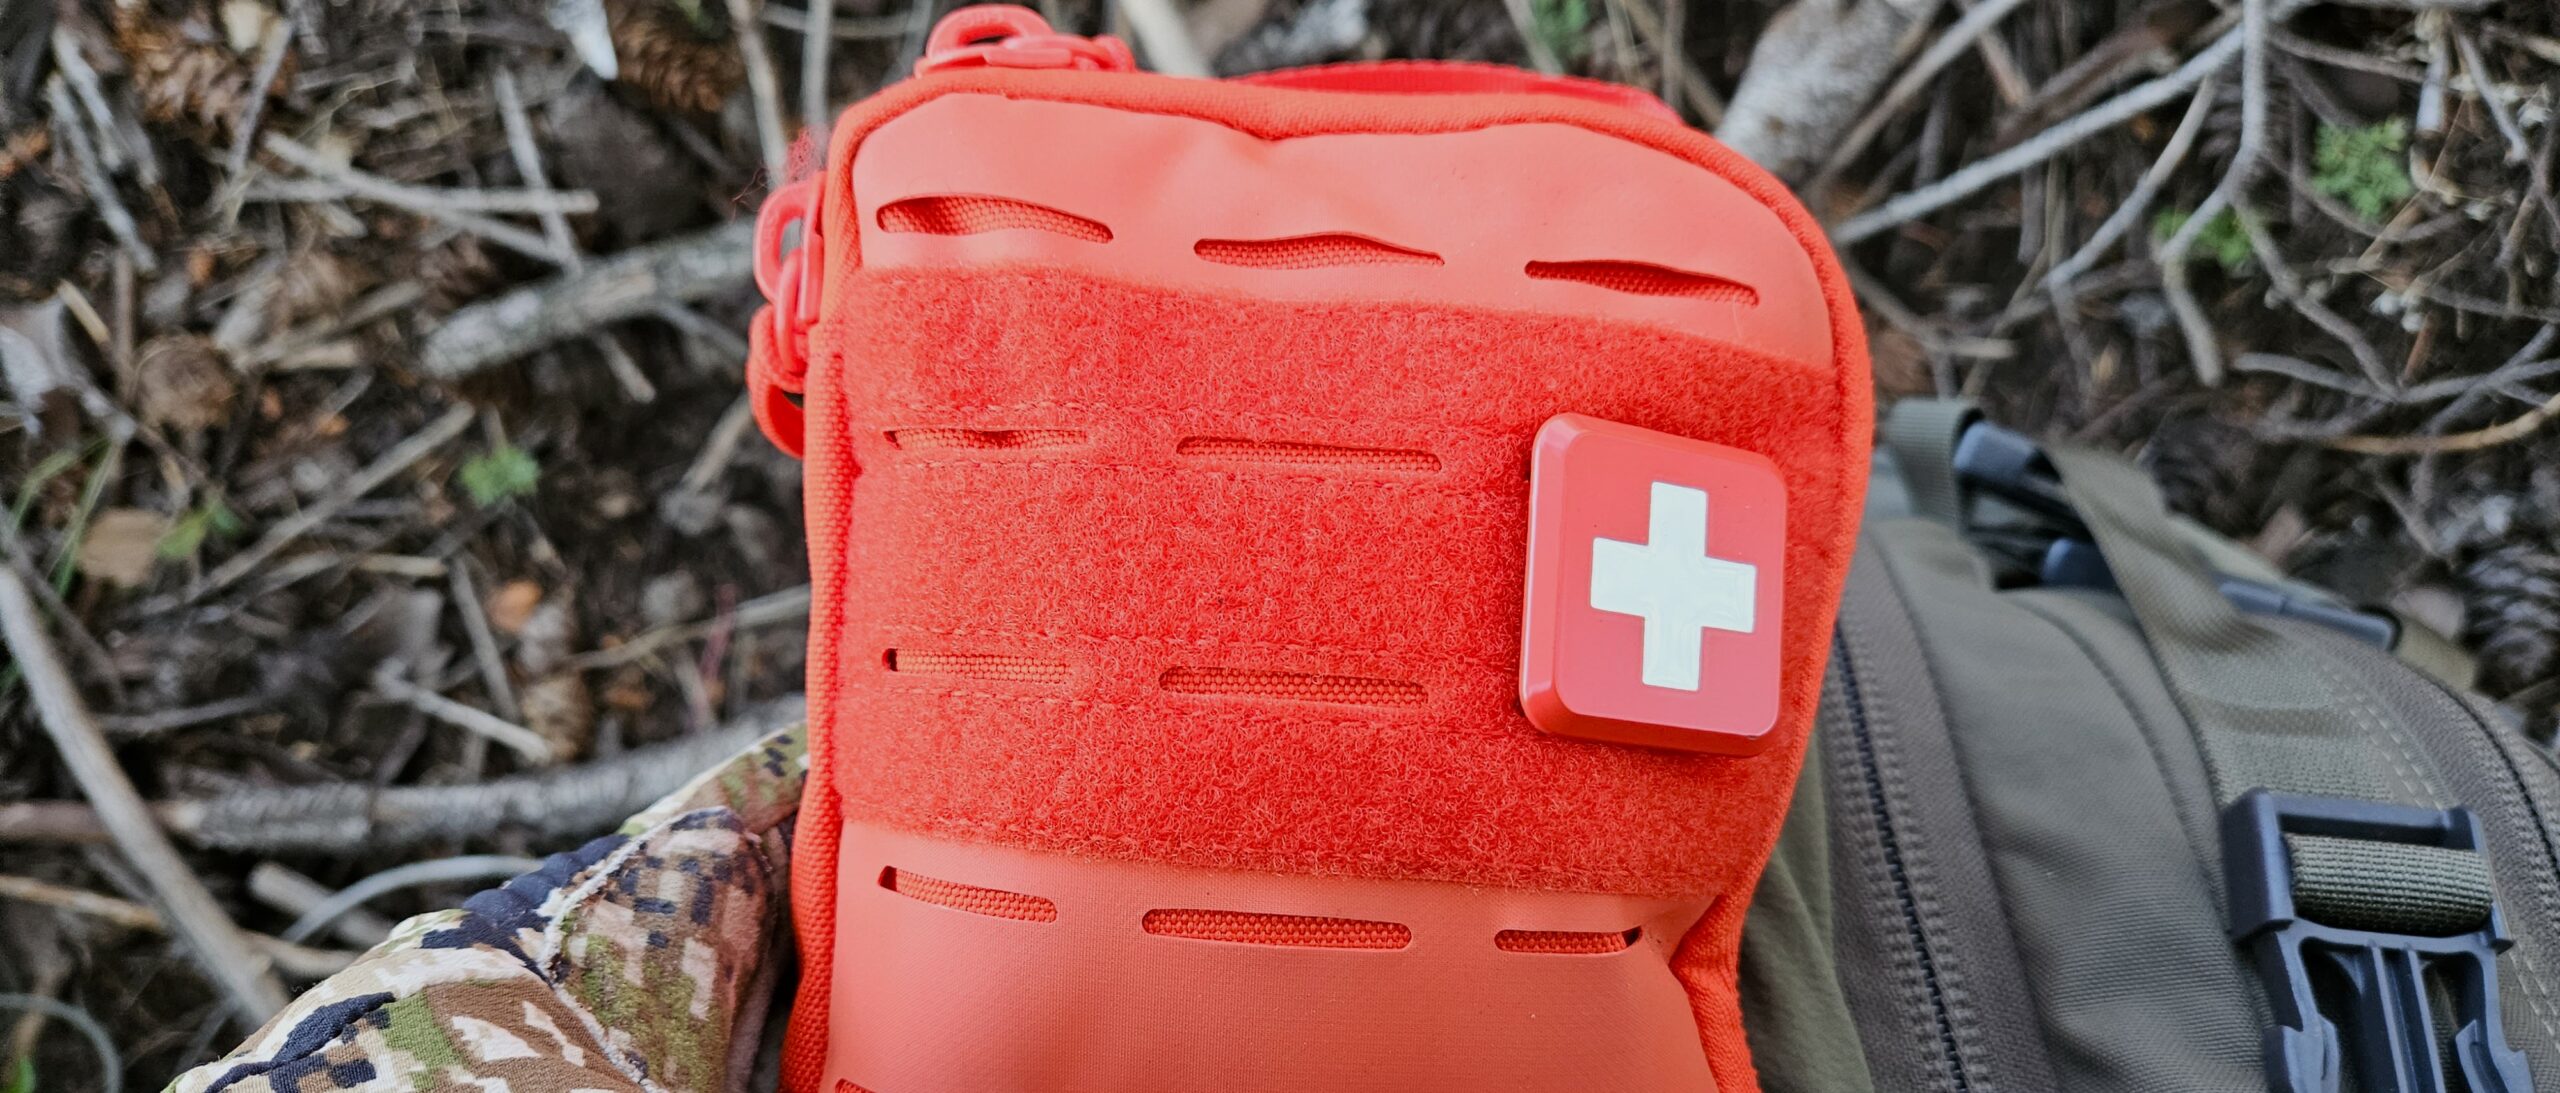 My Medic Review | BEST Backpacking, Hunting, Hiking FIRST AID KIT OPTIONS | 1 lb Custom First Aid Kits